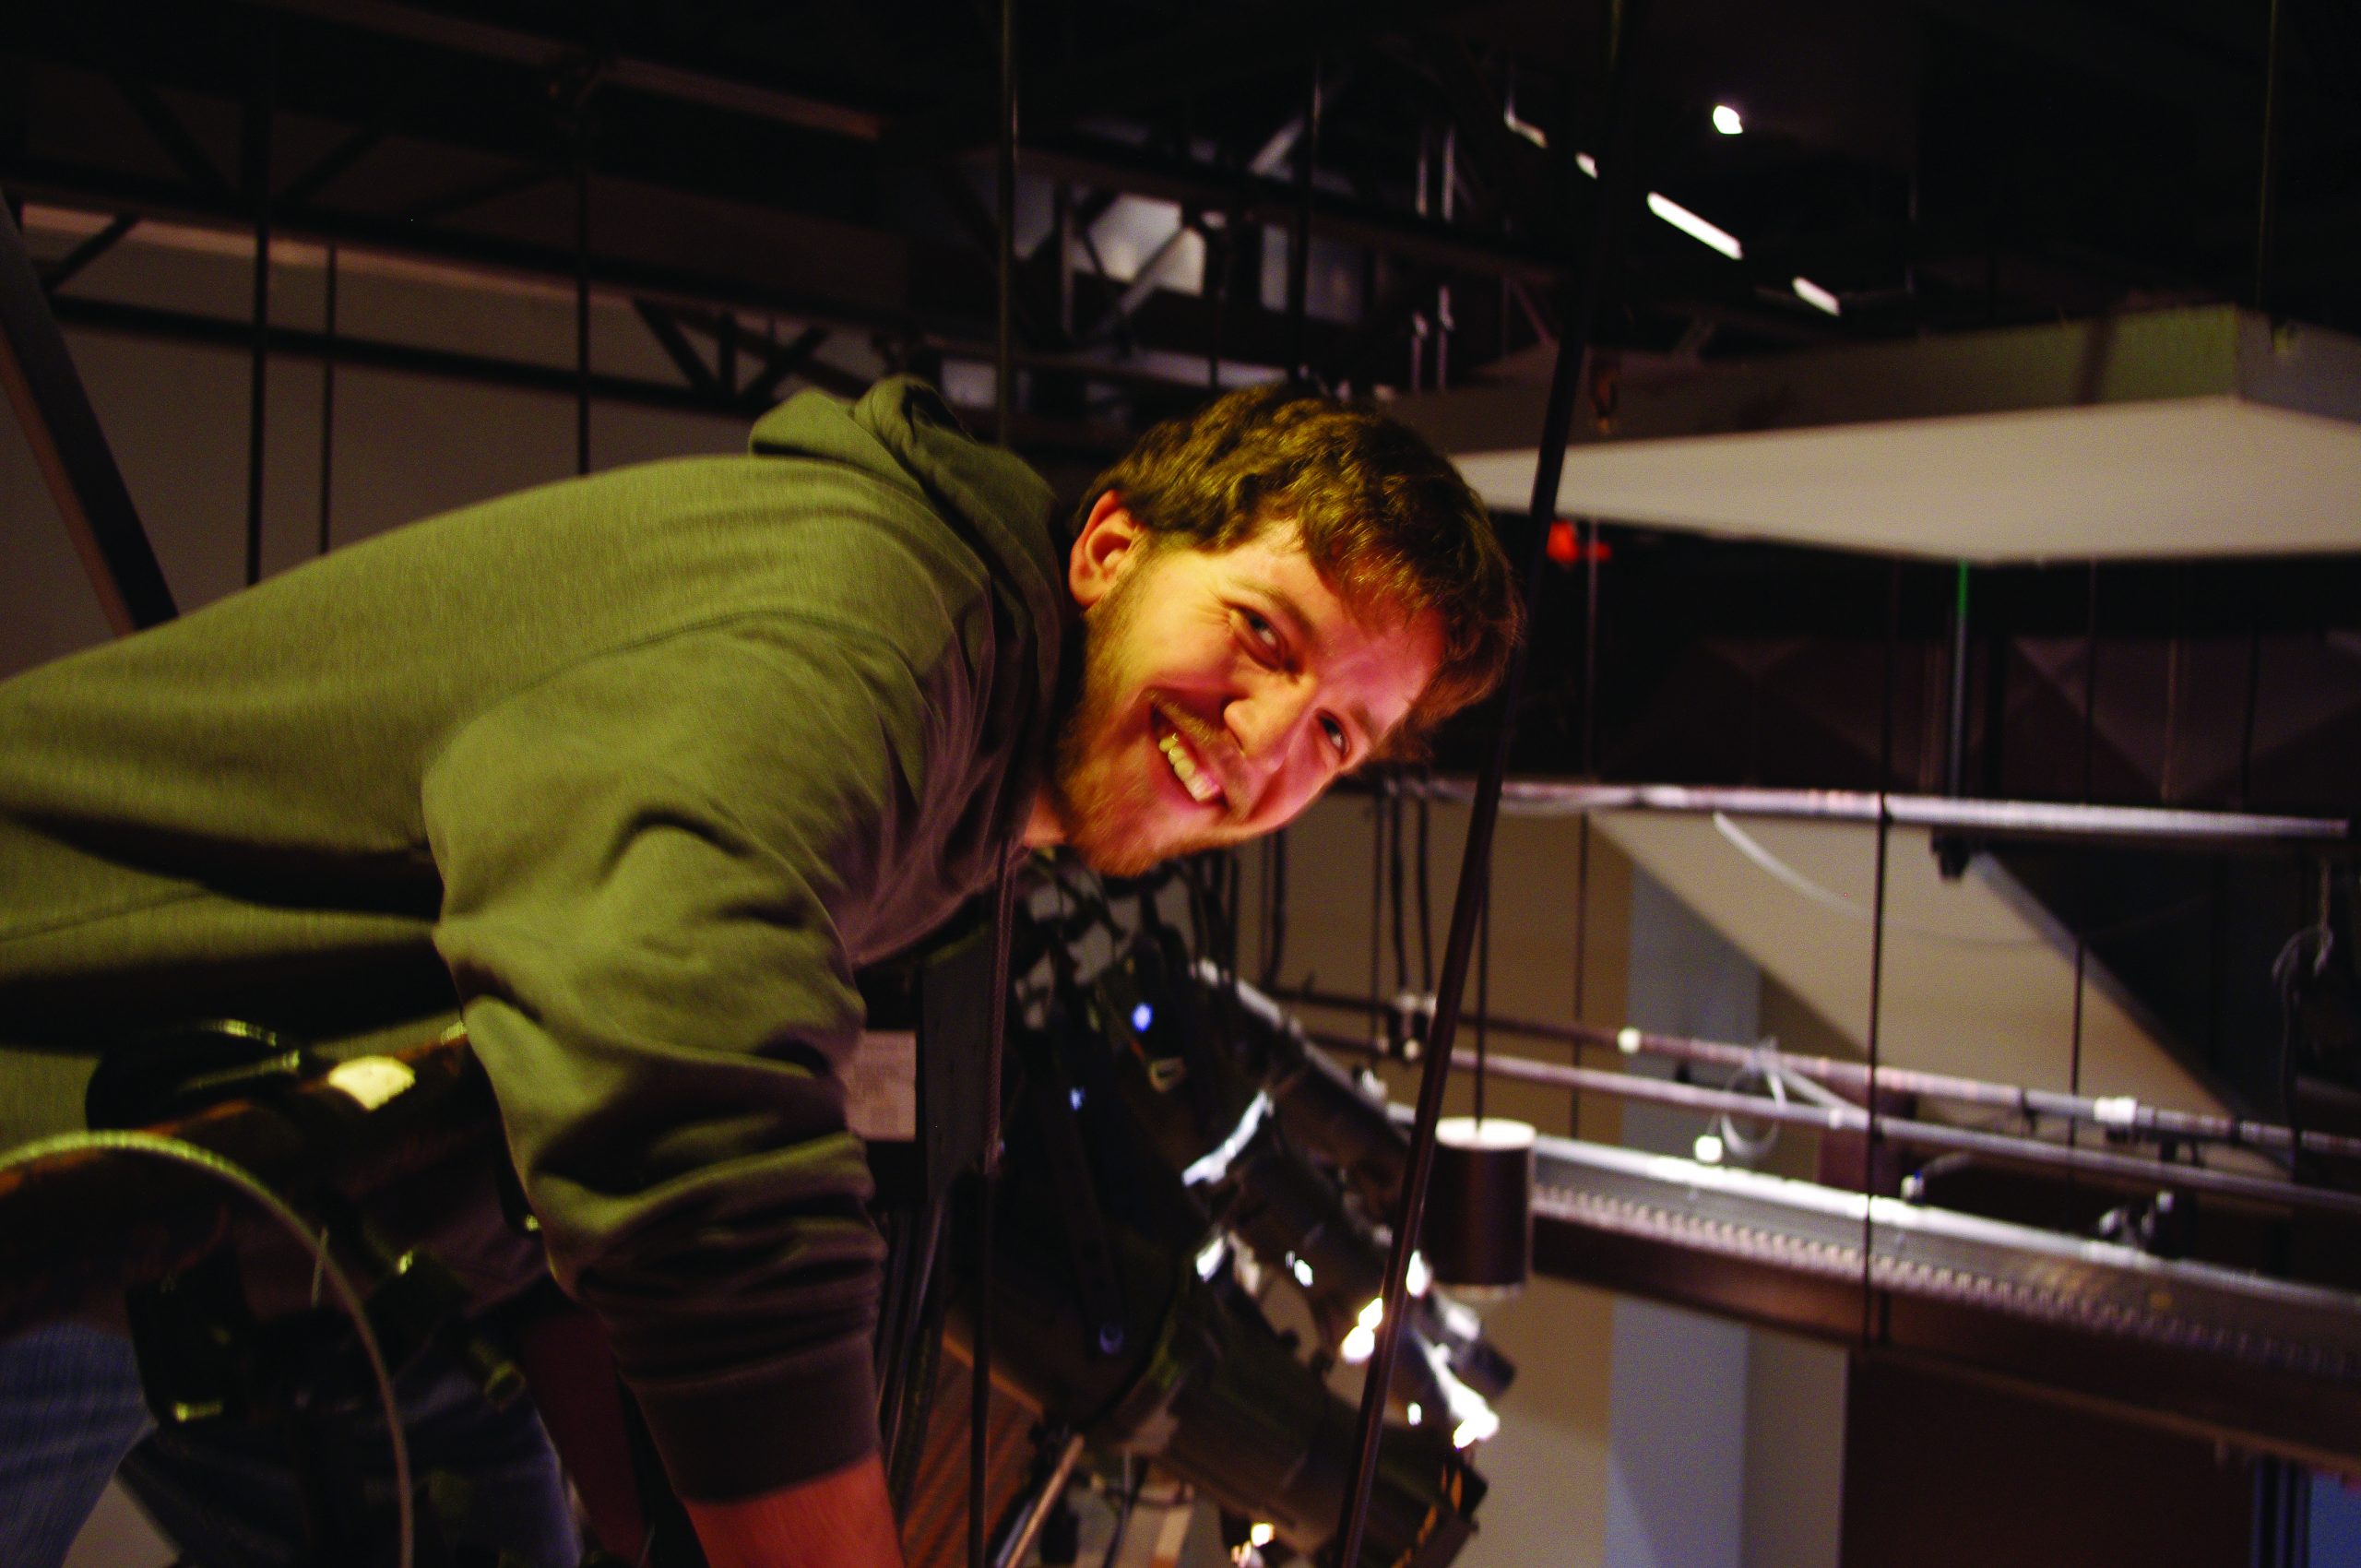 Matt Lehman controls the lighting for a "War of the Worlds" theatre production